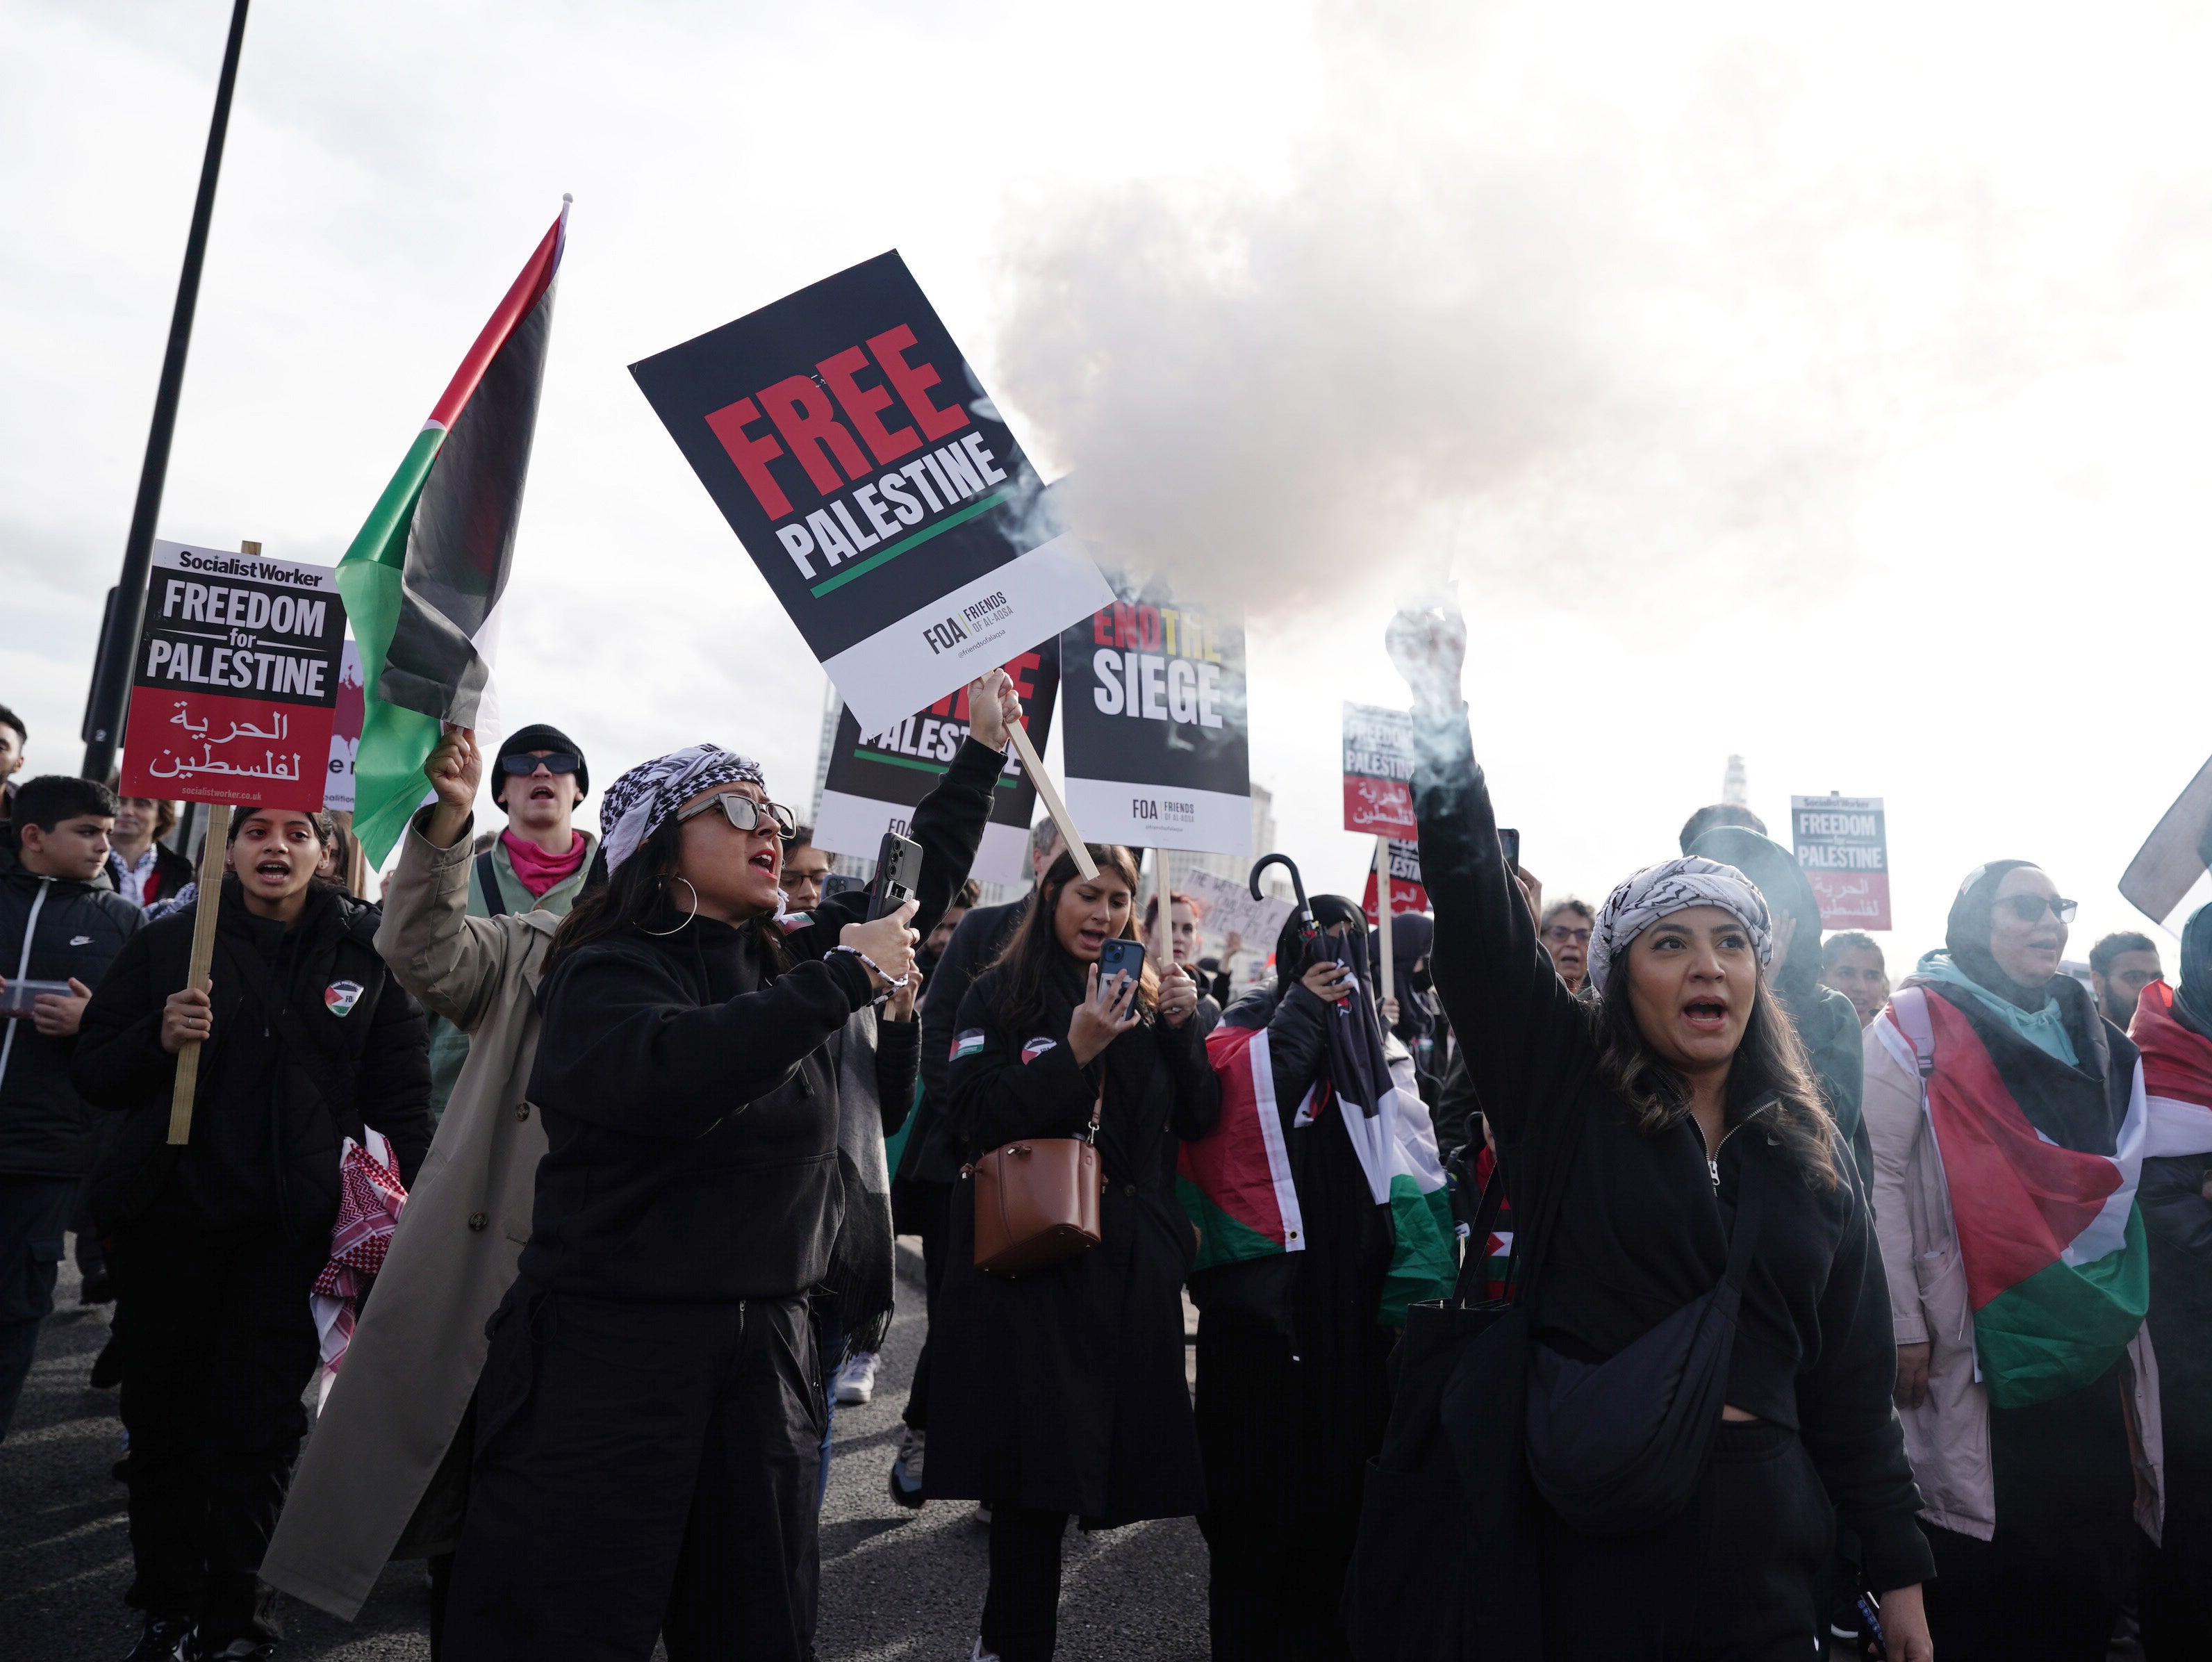 The pro-Palestine march in London on Saturday was mostly peaceful